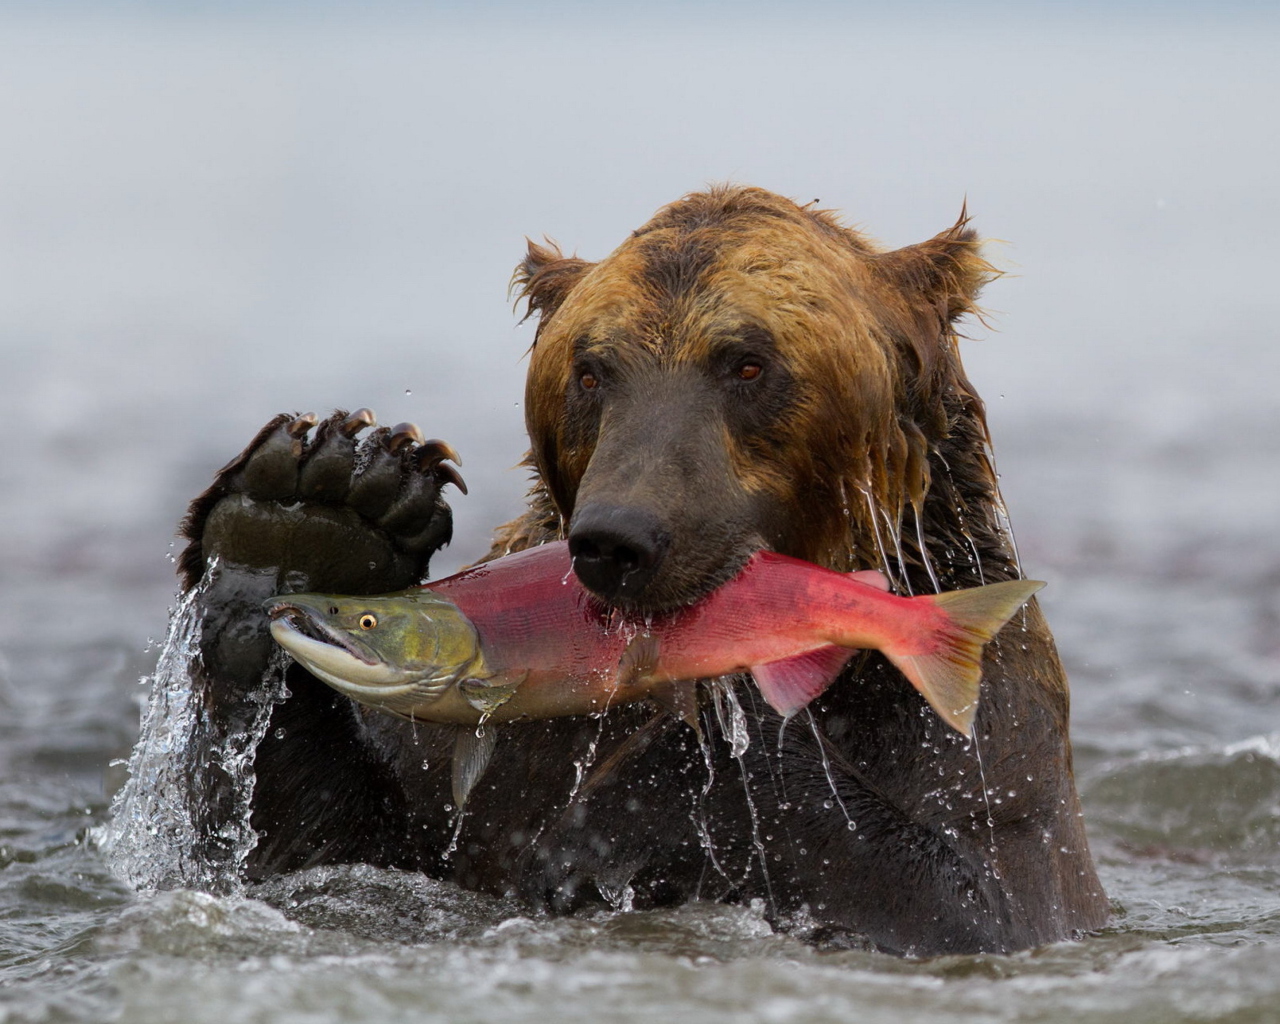 Grizzly Bear Catching Fish wallpaper 1280x1024